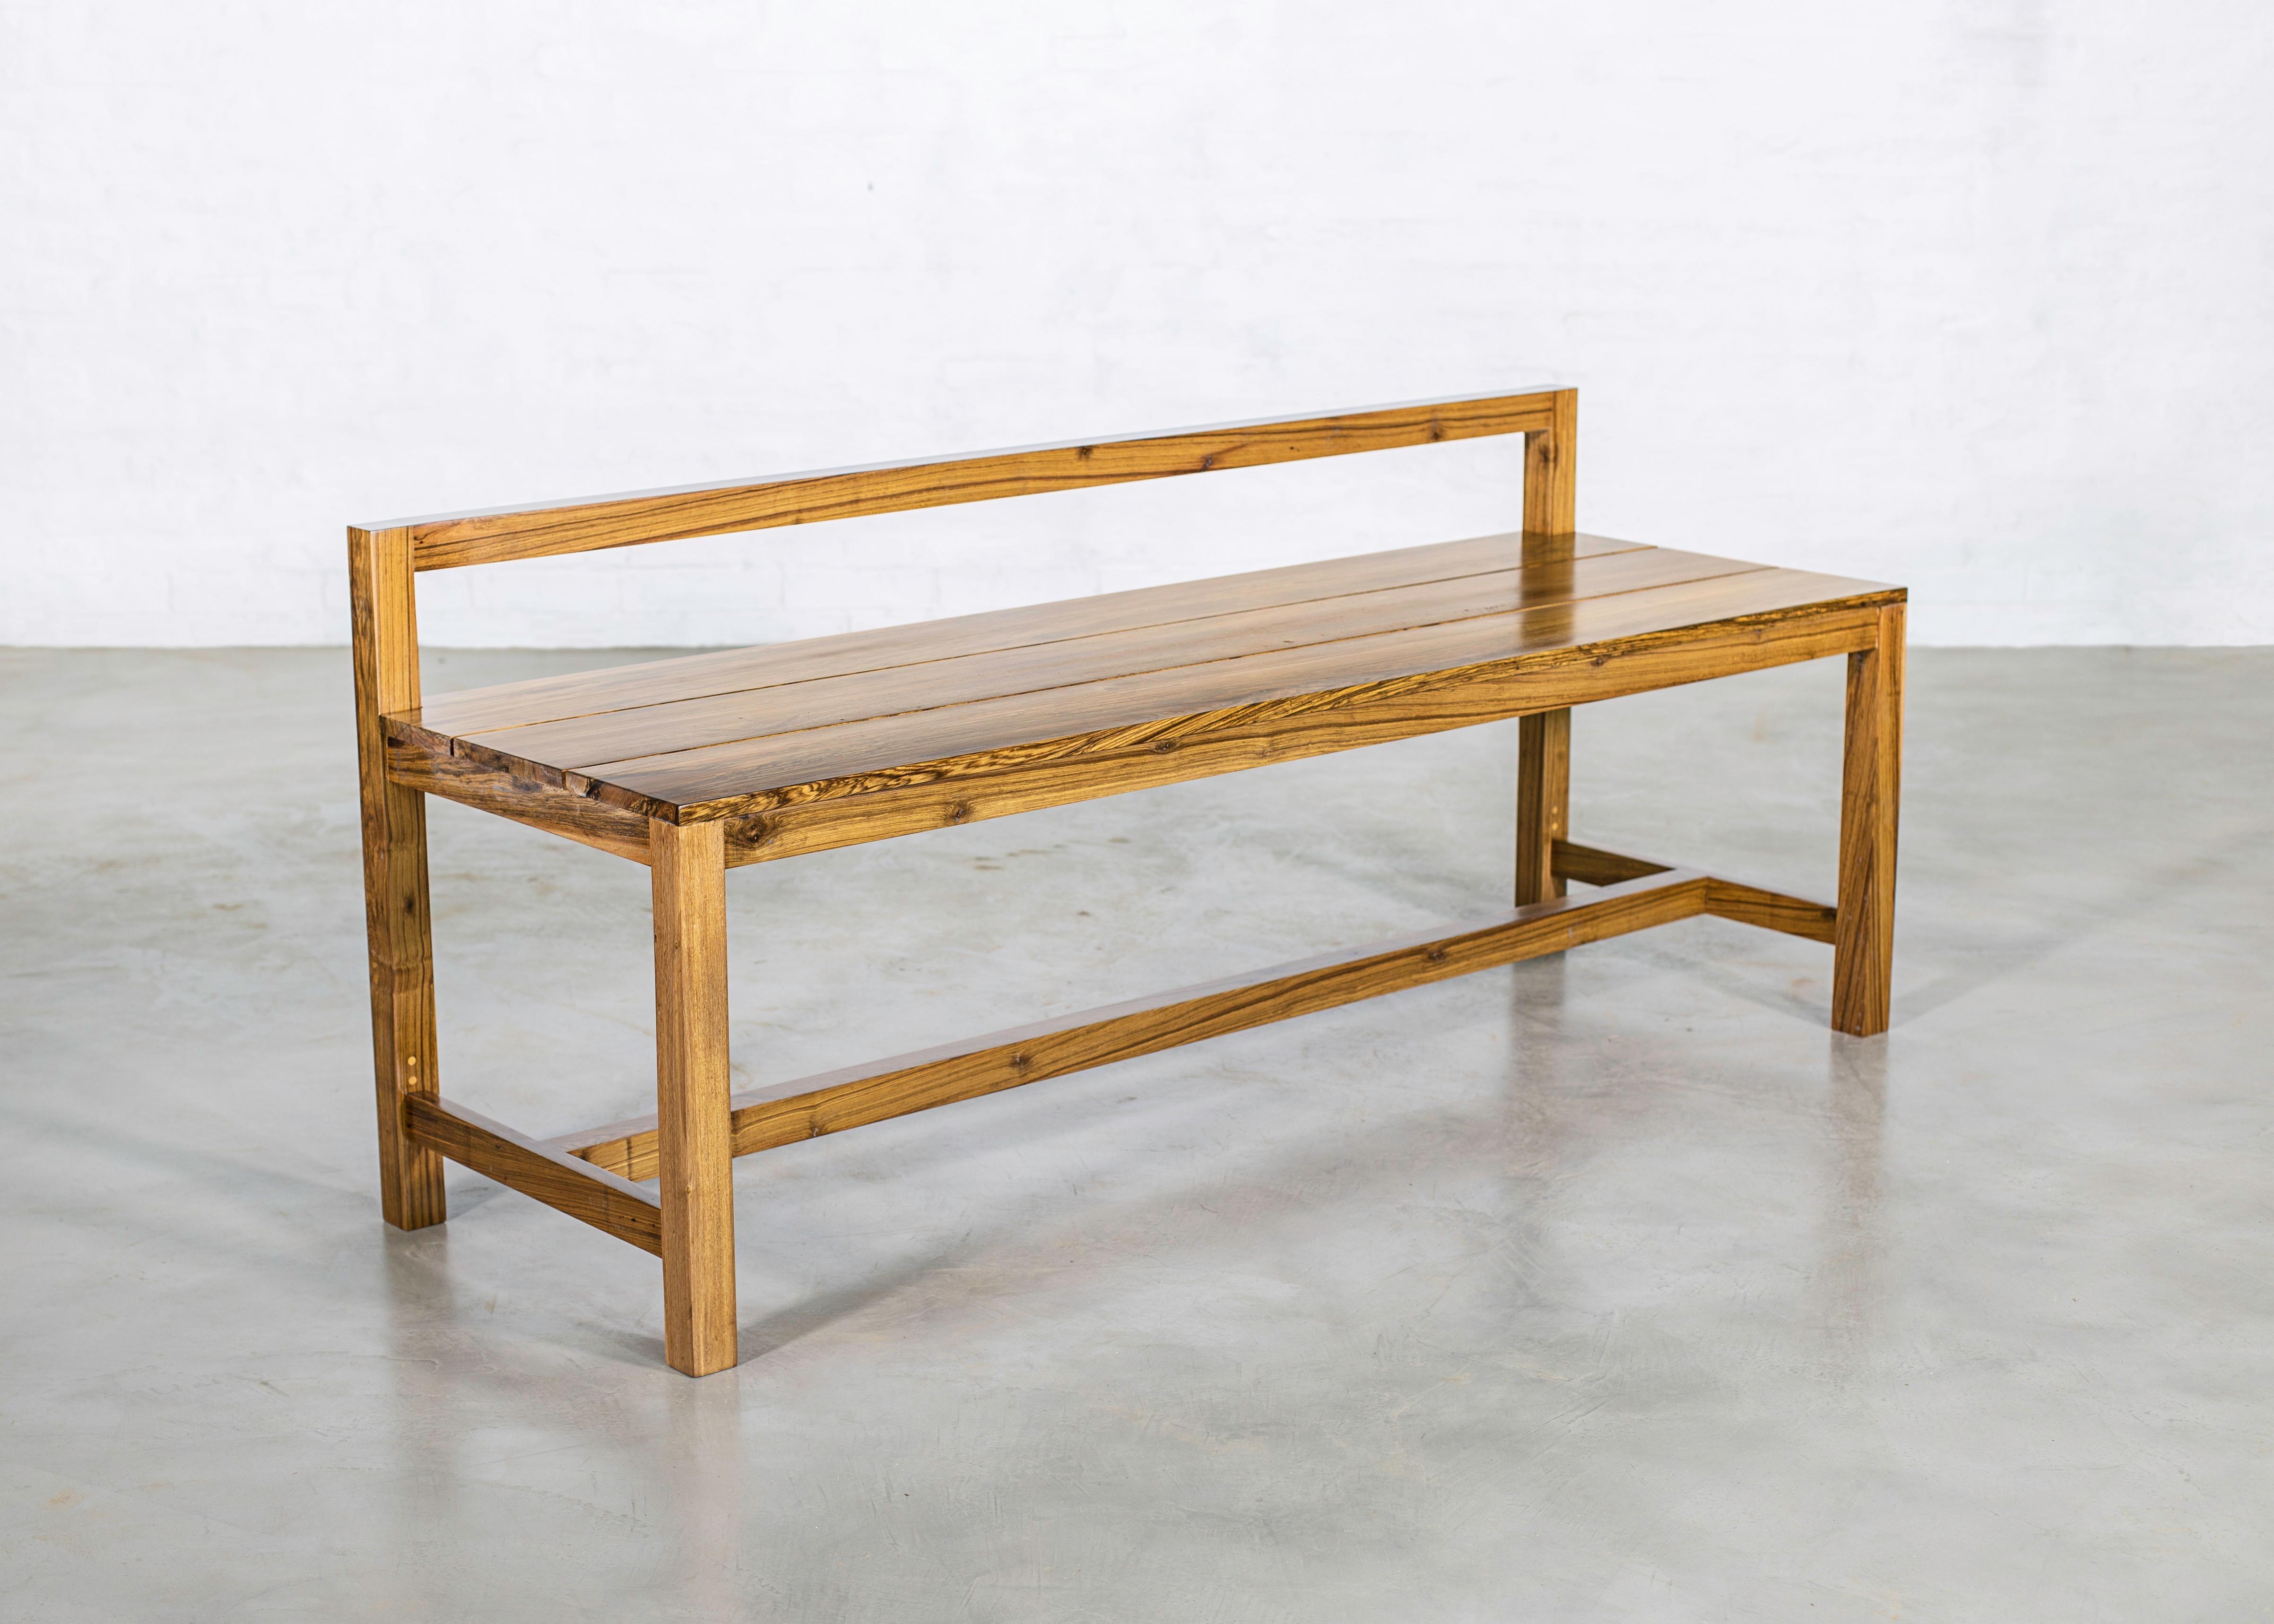 Part of the Serrano family, this solid wood bench gives a nod to the master artist and designer Donald Judd. Shown here in Argentine Rosewood but available in various materials or finishes for indoor or outdoor use.

Measurements are: 60